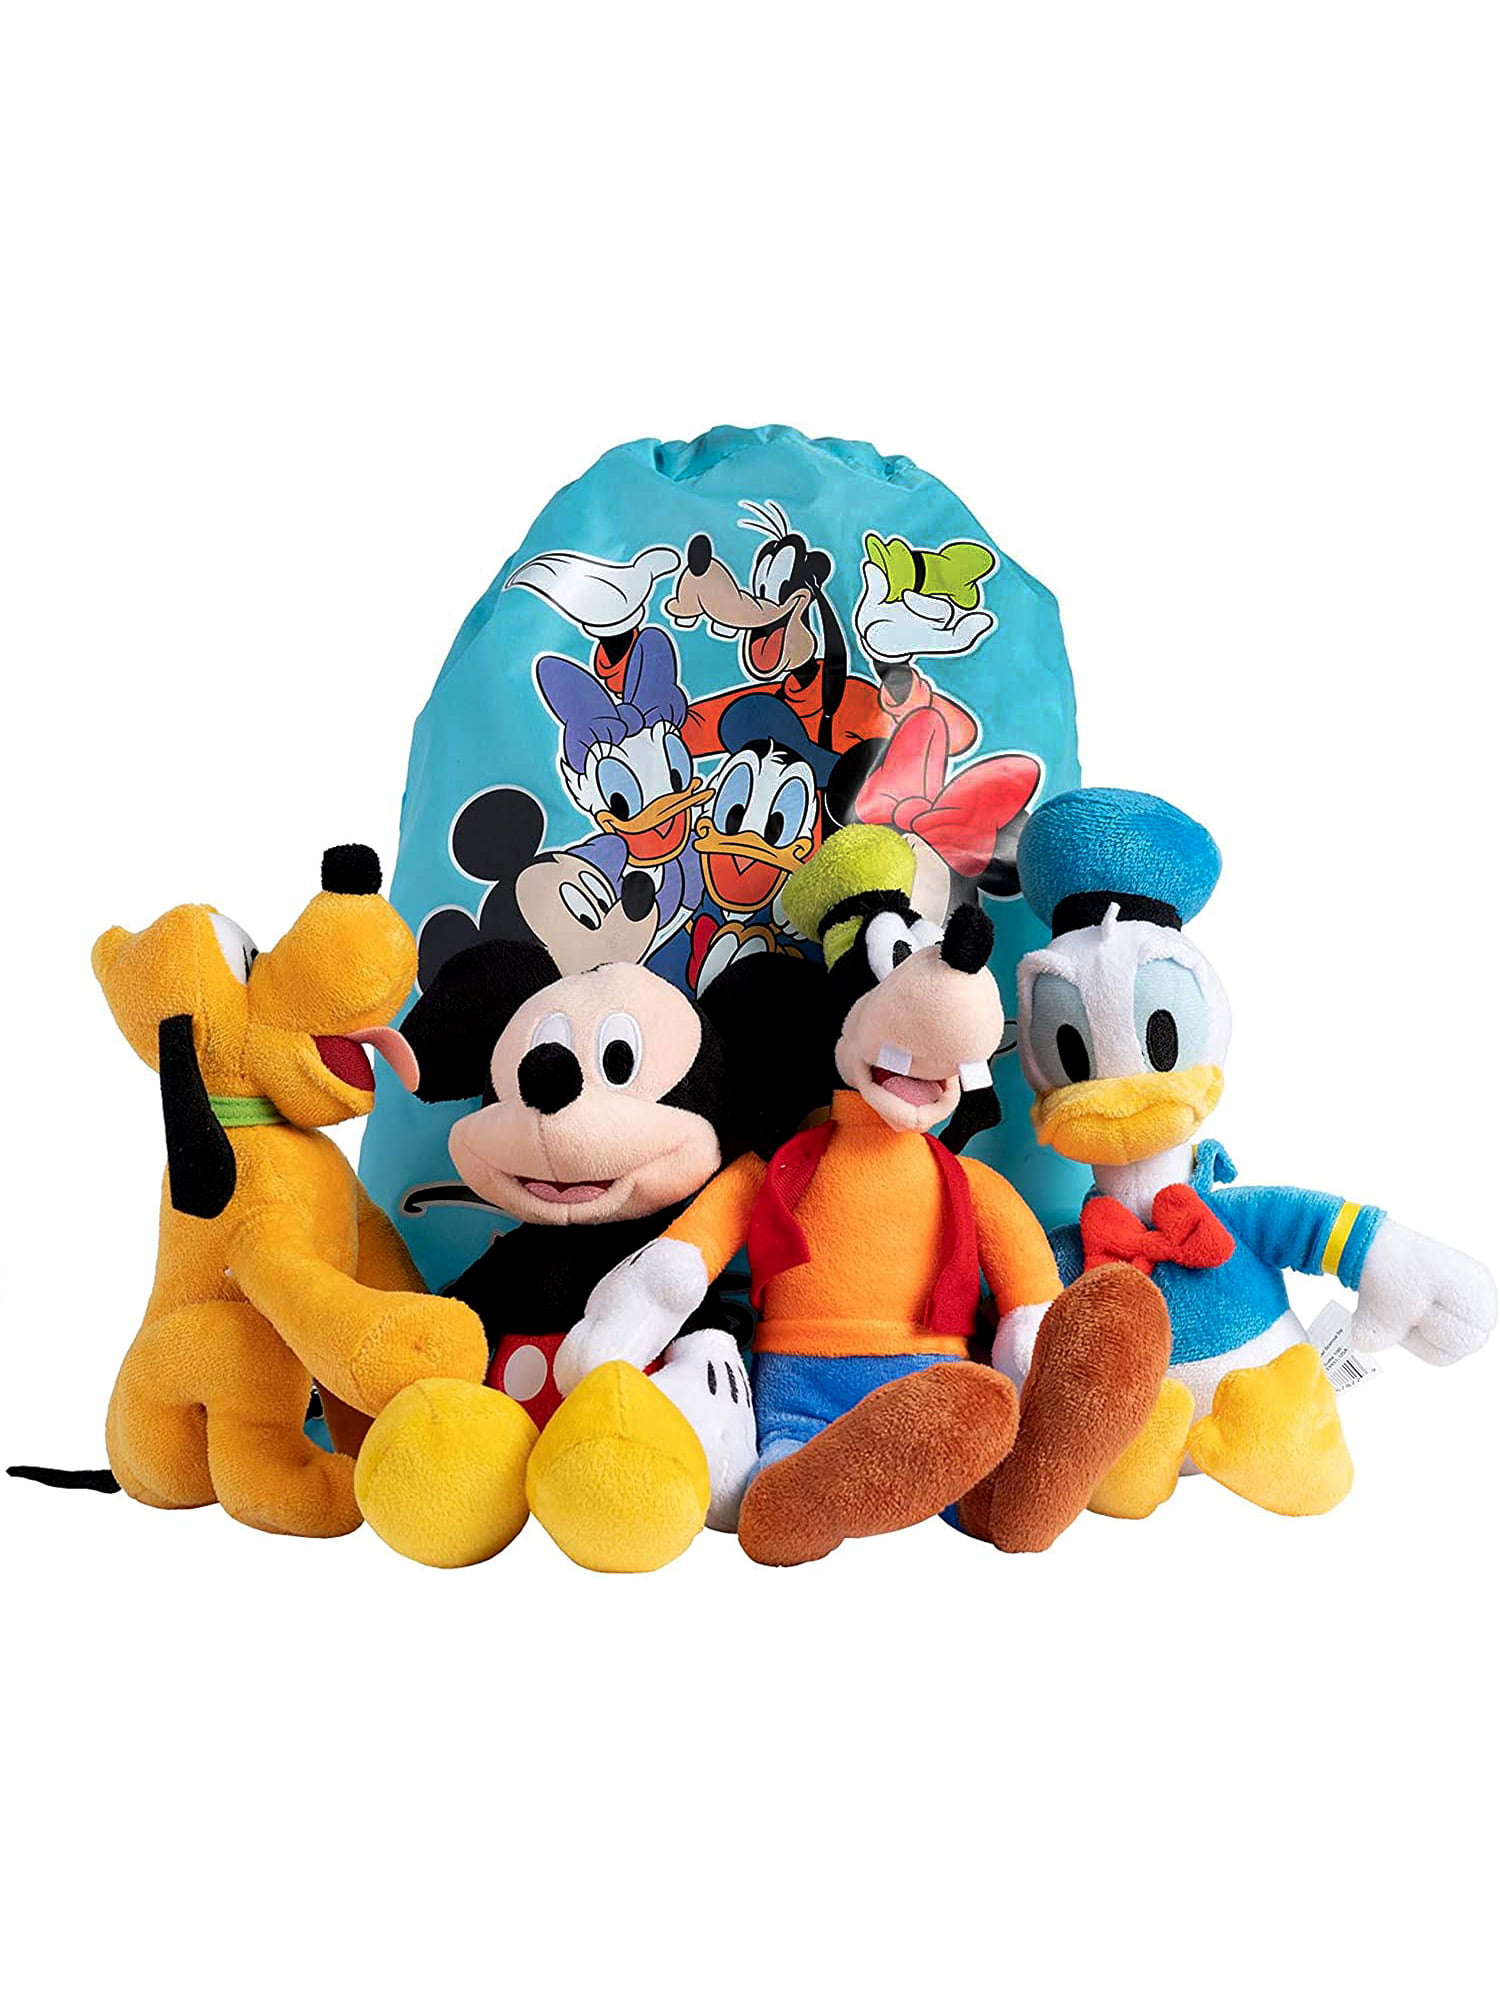 Micky Donald Duck Pluto Goofy 7PCS Movie Action Figure Kids Toy Gift Cake Topper 